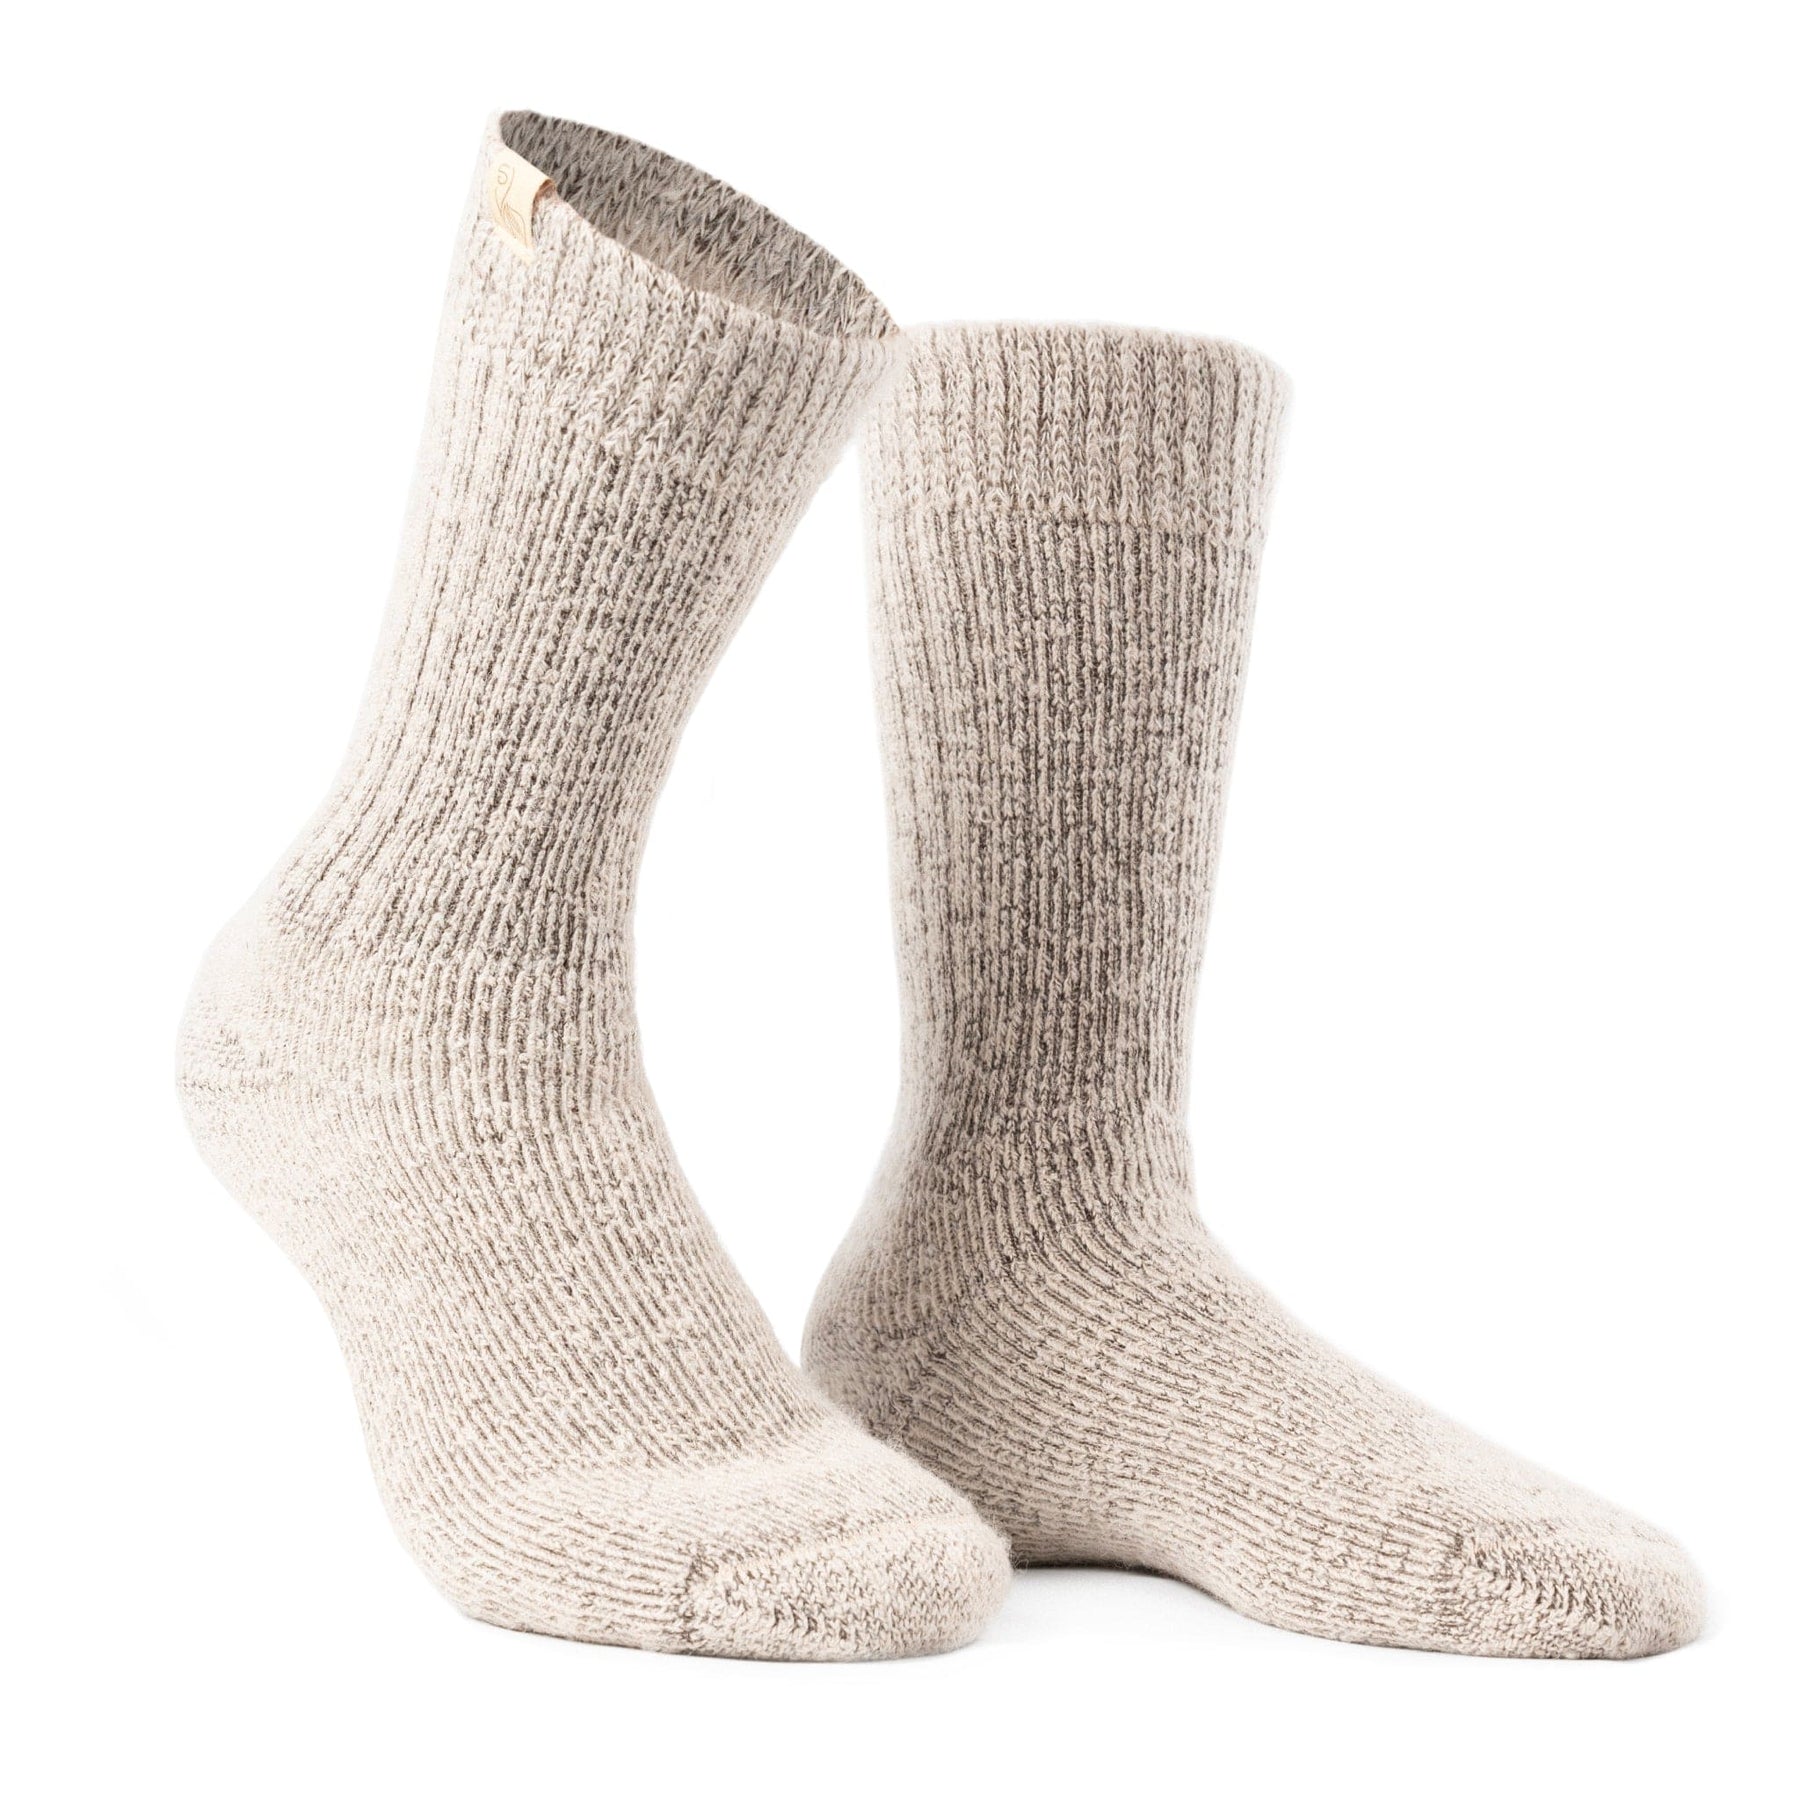 Alpaca socks thermal for Kids - Made in Quebec - Boutique art Inca